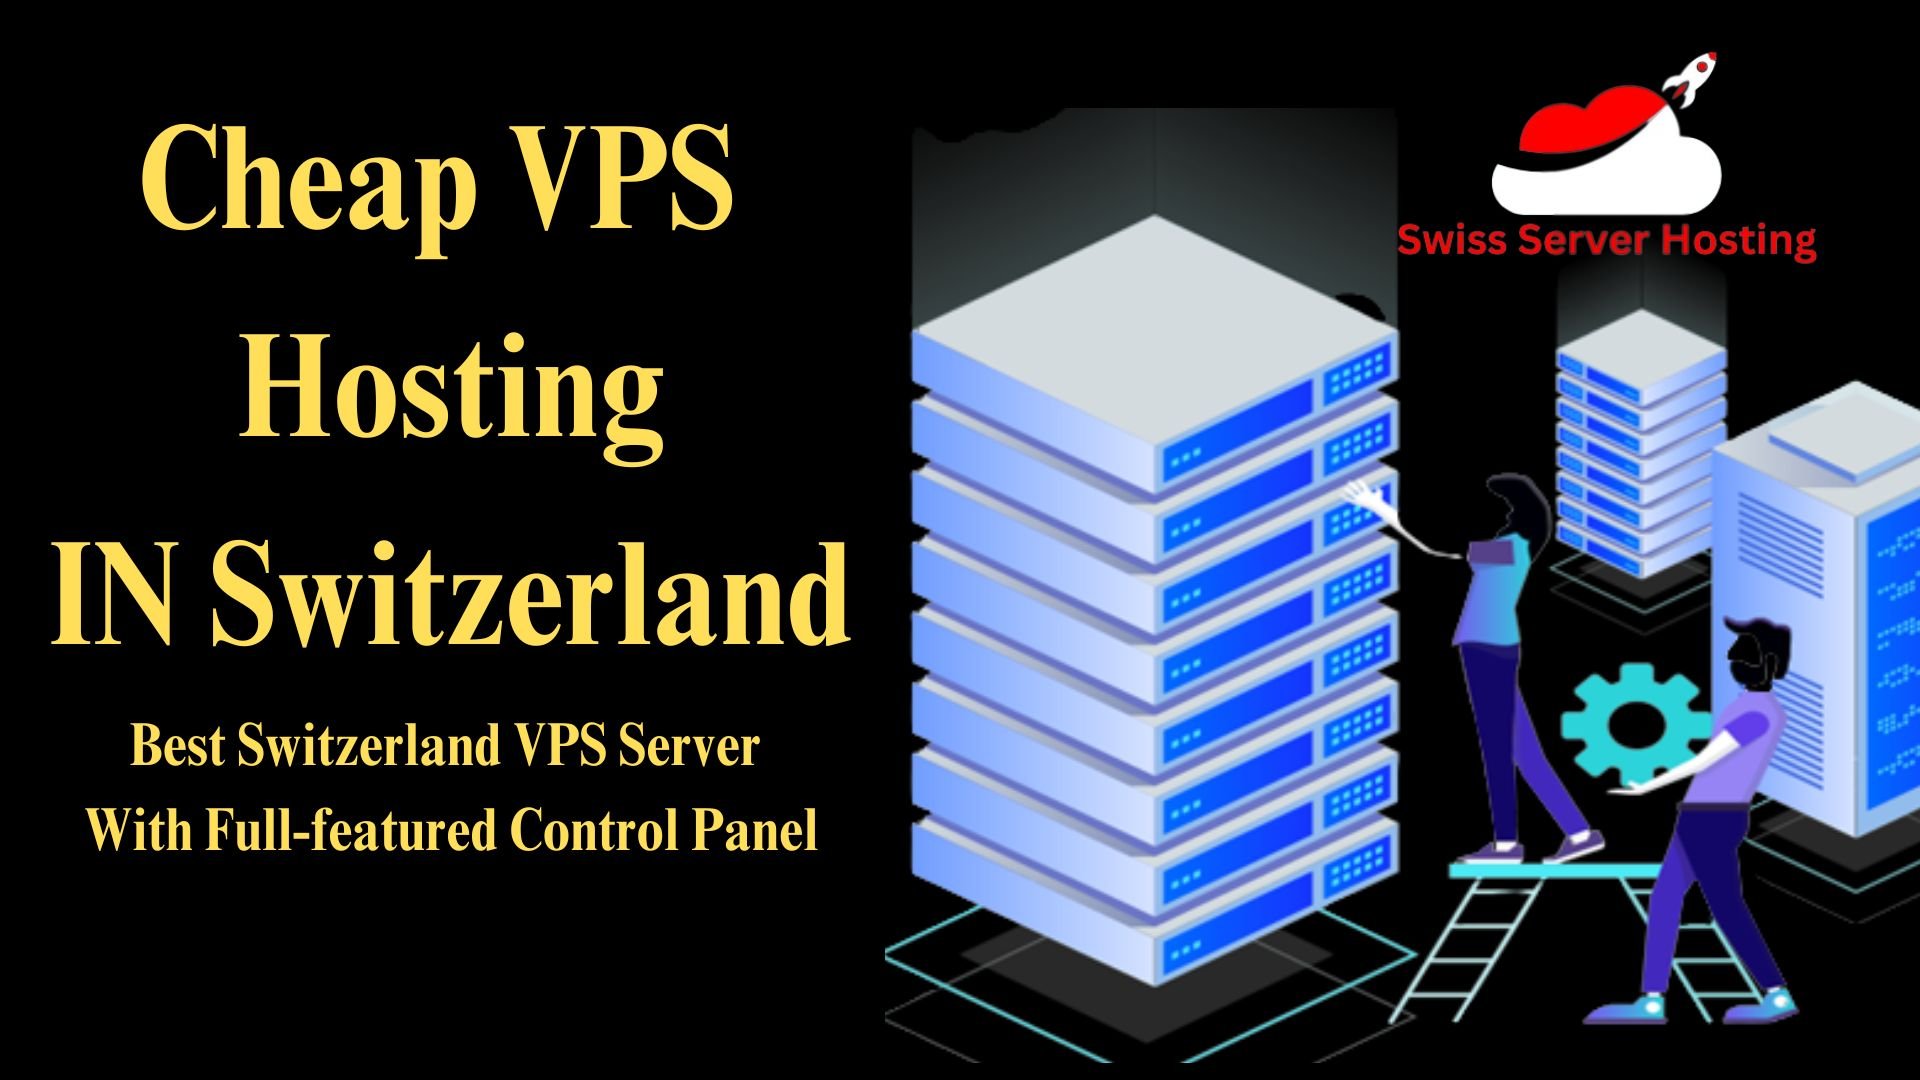 How to Get High Performance Cheap VPS Hosting